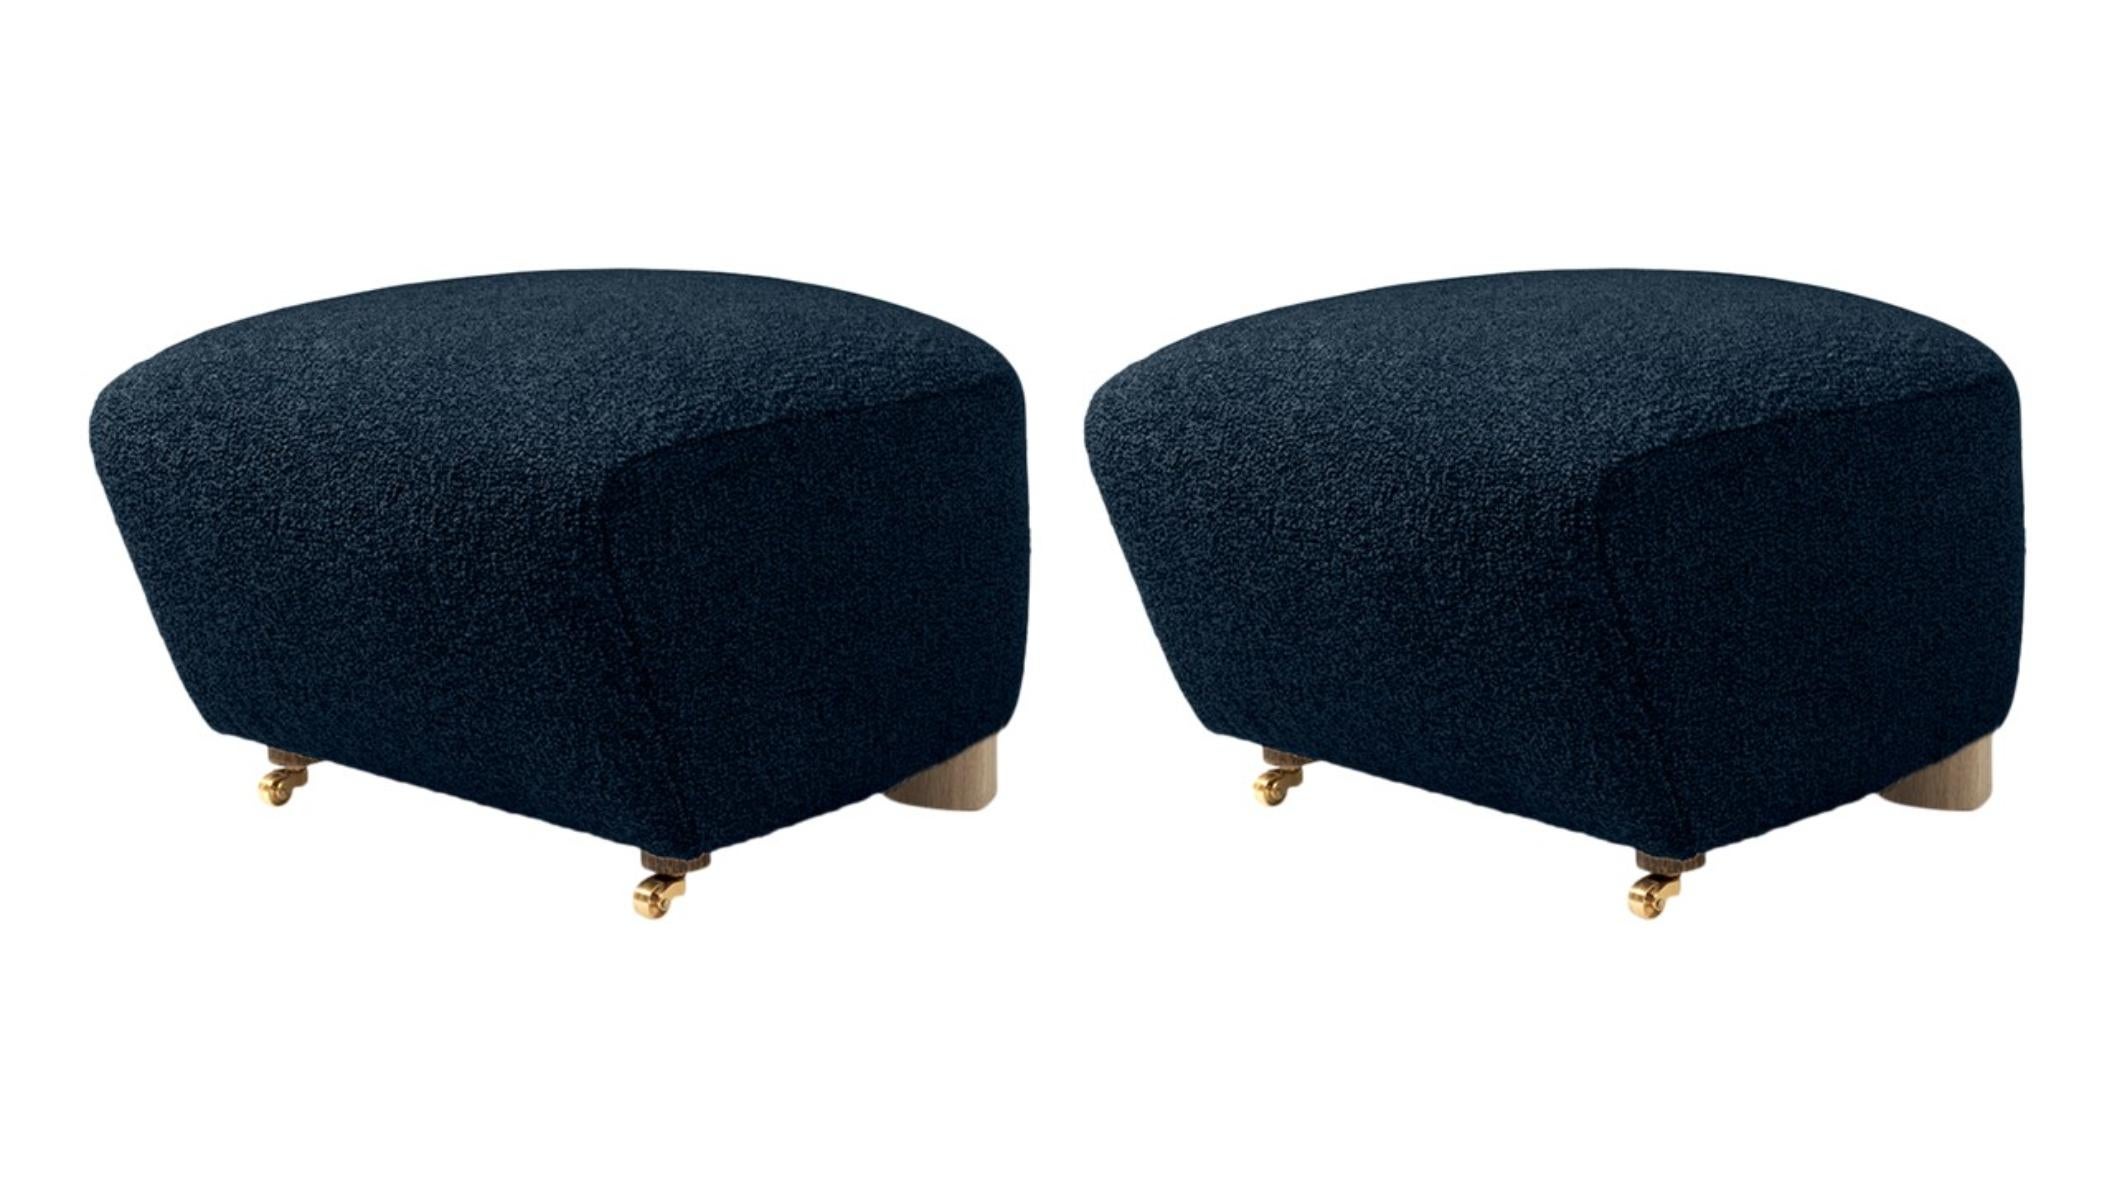 Set of 2 blue Natural Oak Sahco Zero the Tired Man footstools by Lassen
Dimensions: W 55 x D 53 x H 36 cm 
Materials: Textile

Flemming Lassen designed the overstuffed easy chair, The Tired Man, for The Copenhagen Cabinetmakers’ Guild